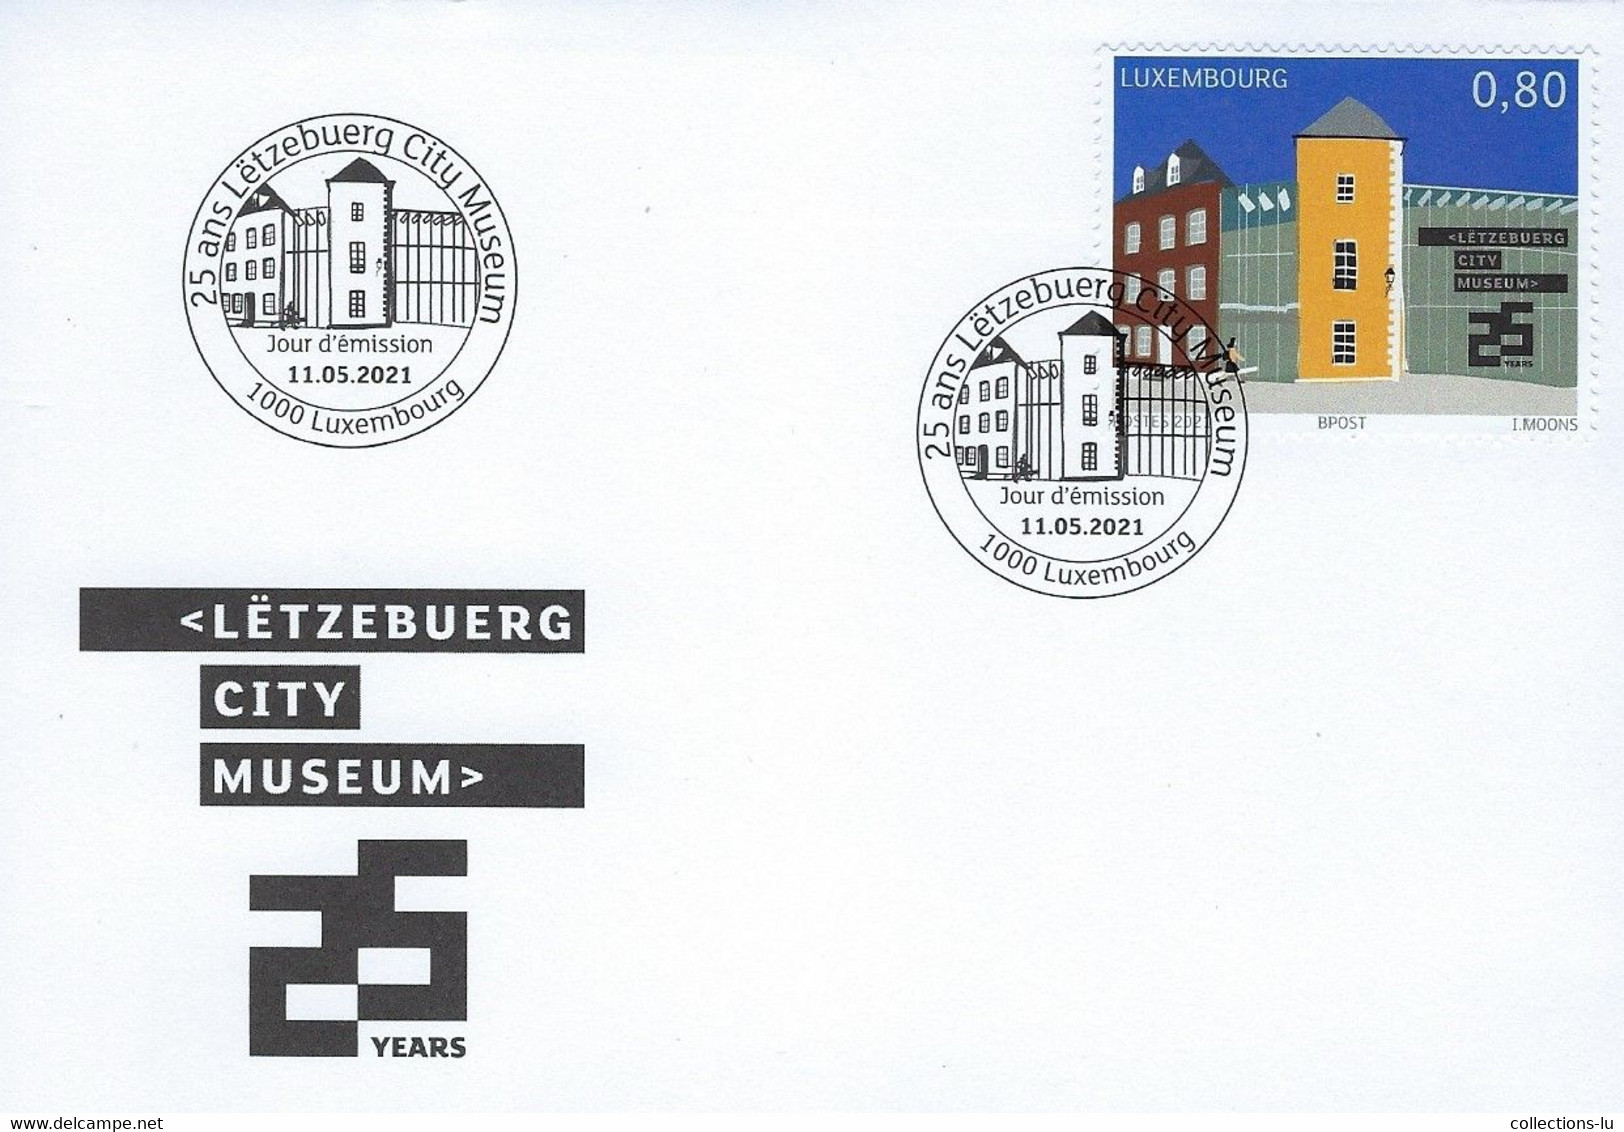 Luxembourg - Luxemburg - FDC 2021  Lëtzebuerg  City Museum  25 Years - FDC